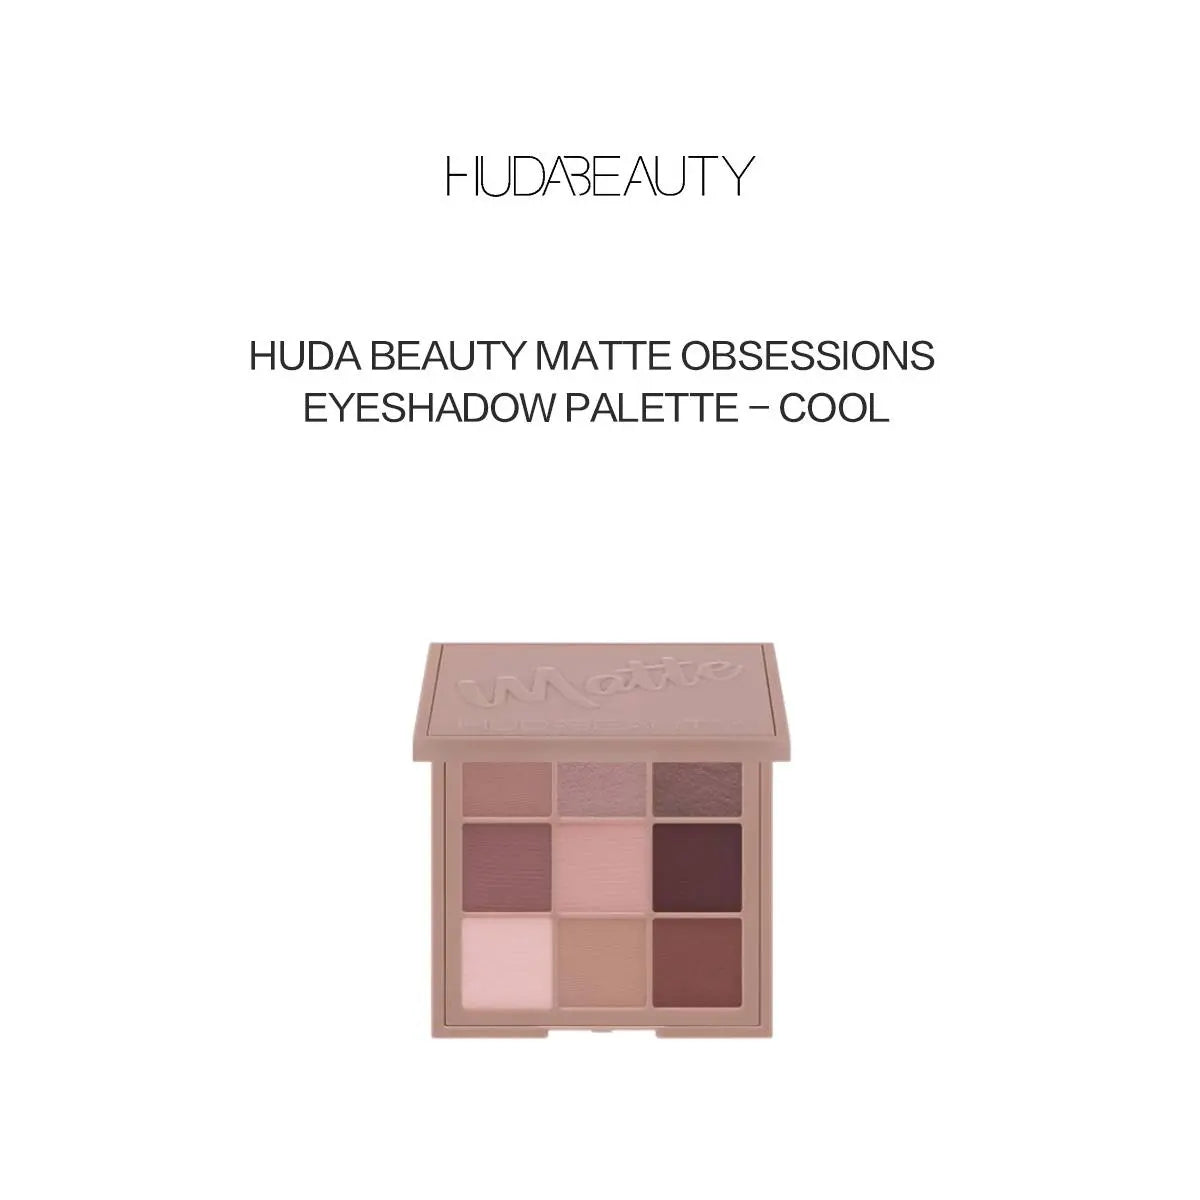 HUDA BEAUTY Matte Obsessions Eyeshadow Palette - Cool